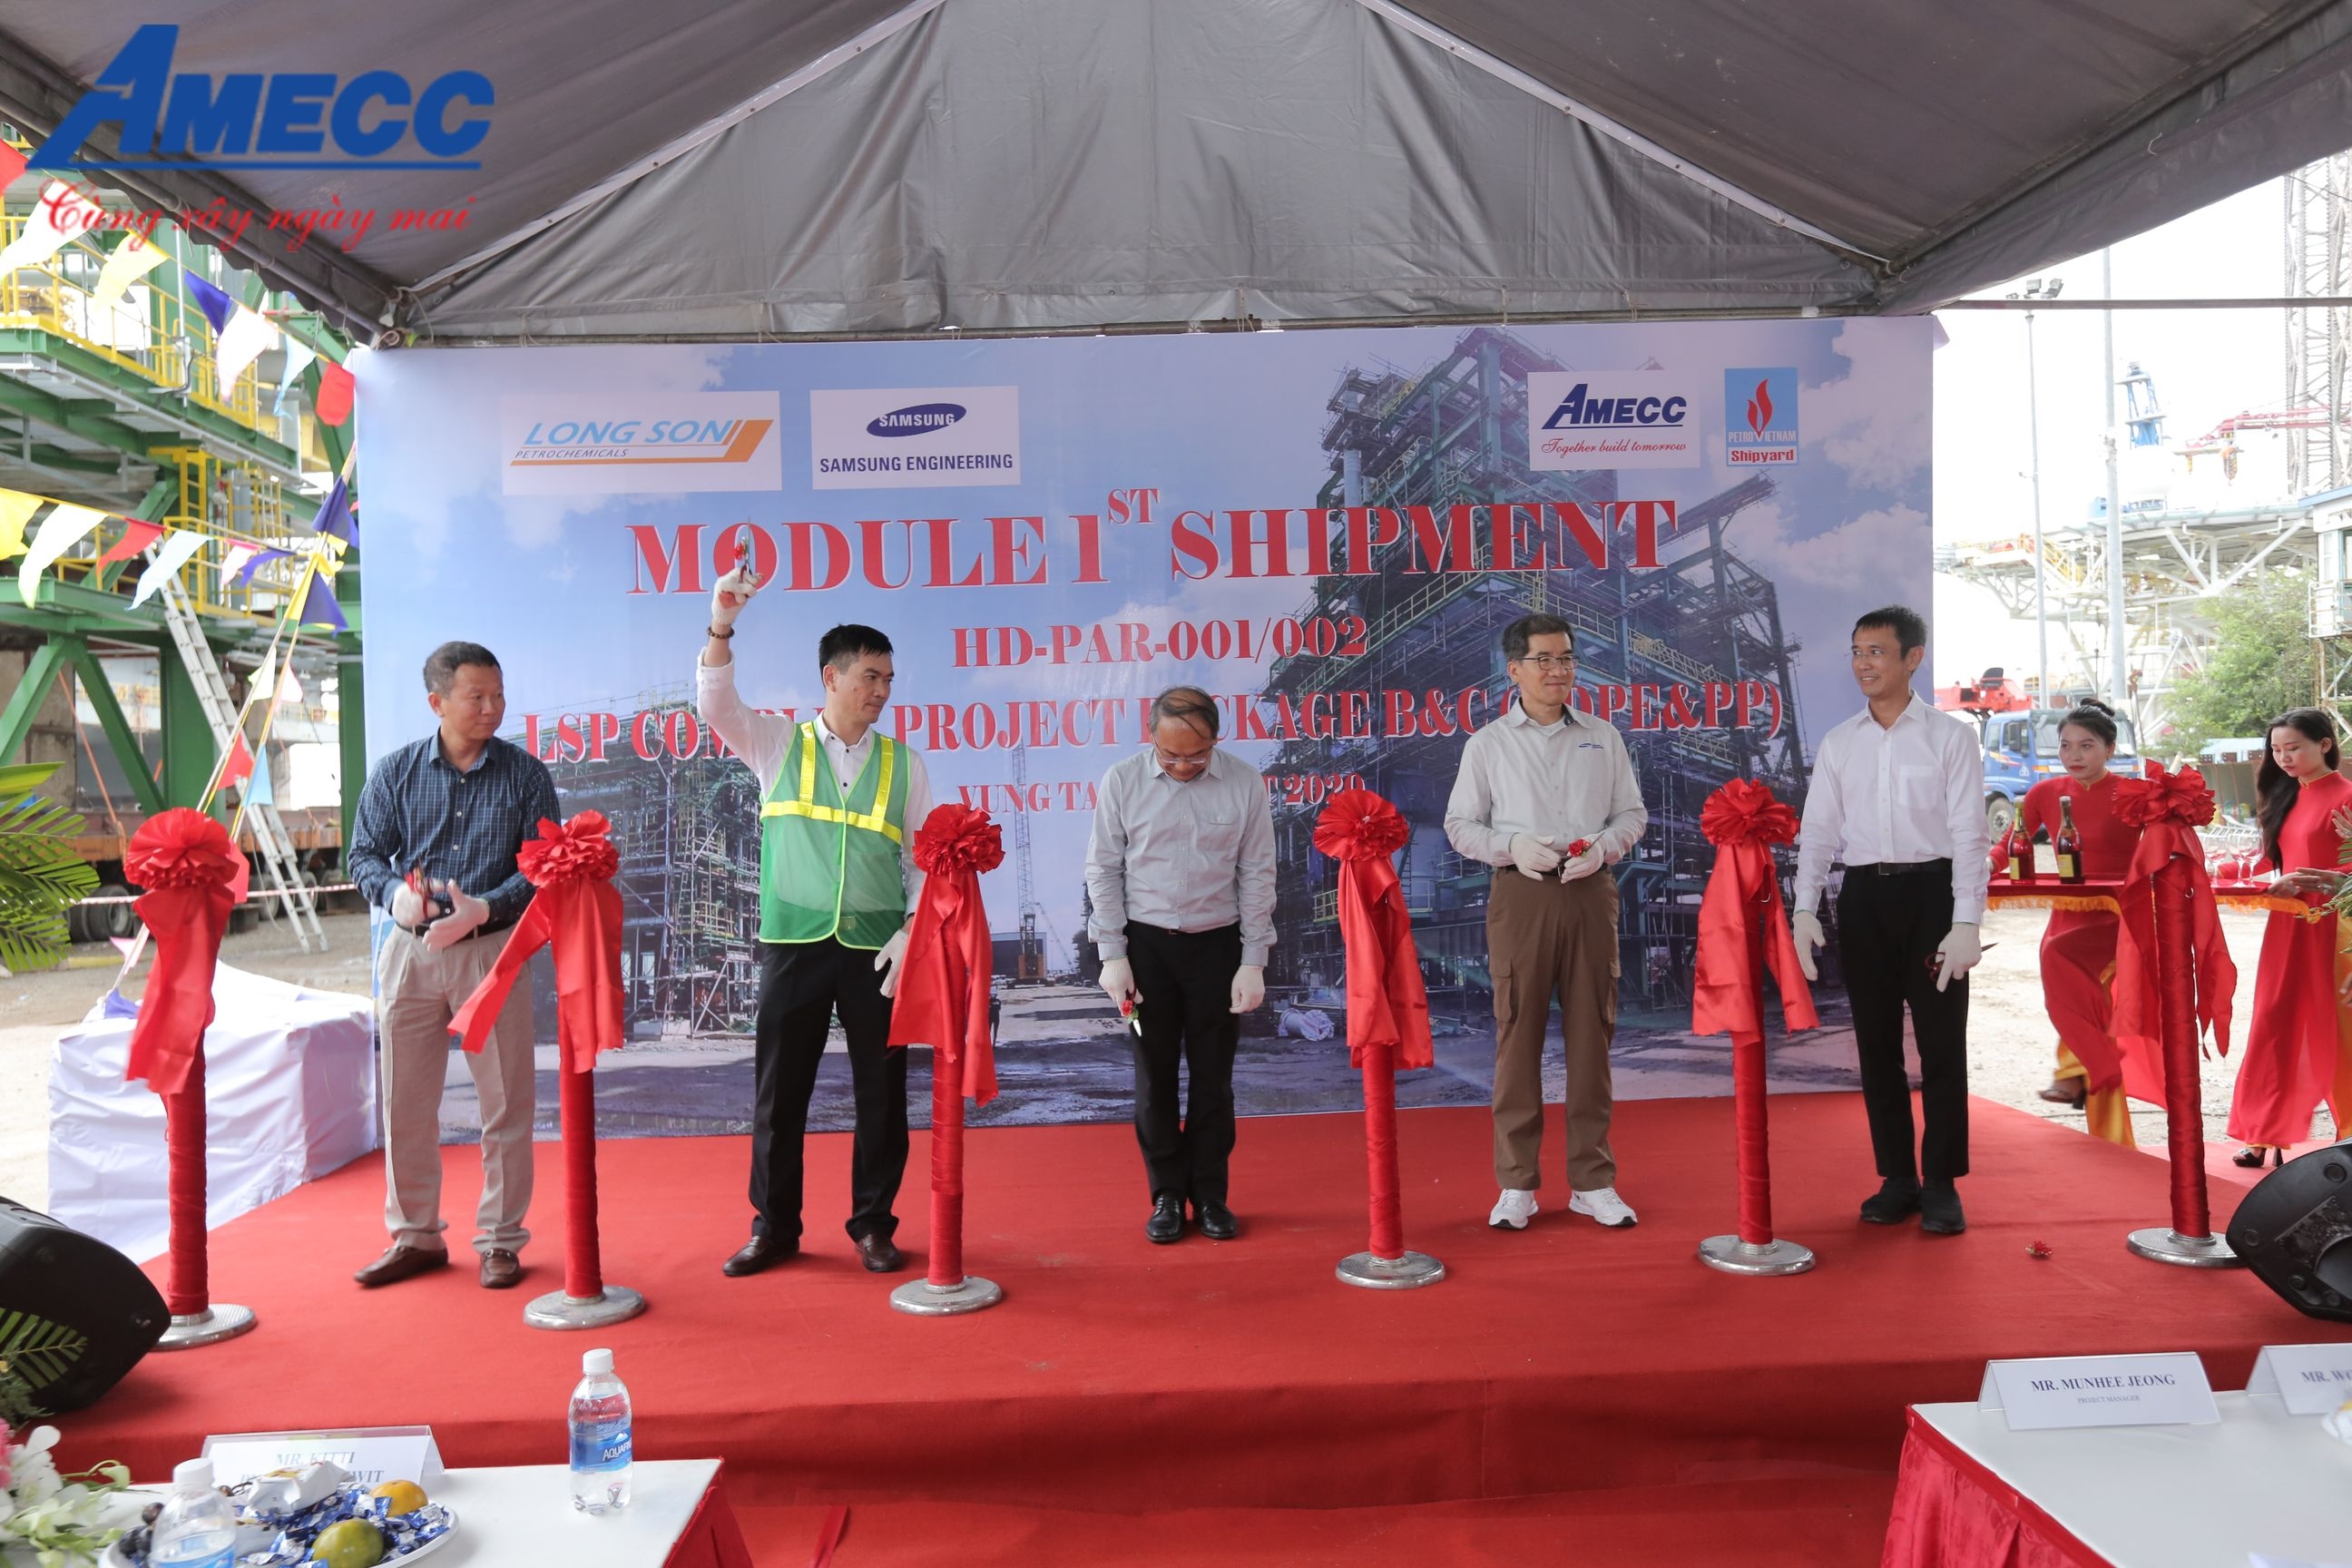 AMECC - LAUNCHING MODULES 1, 2 - LONG SON PETROCHEMICAL COMPLEX PROJECT